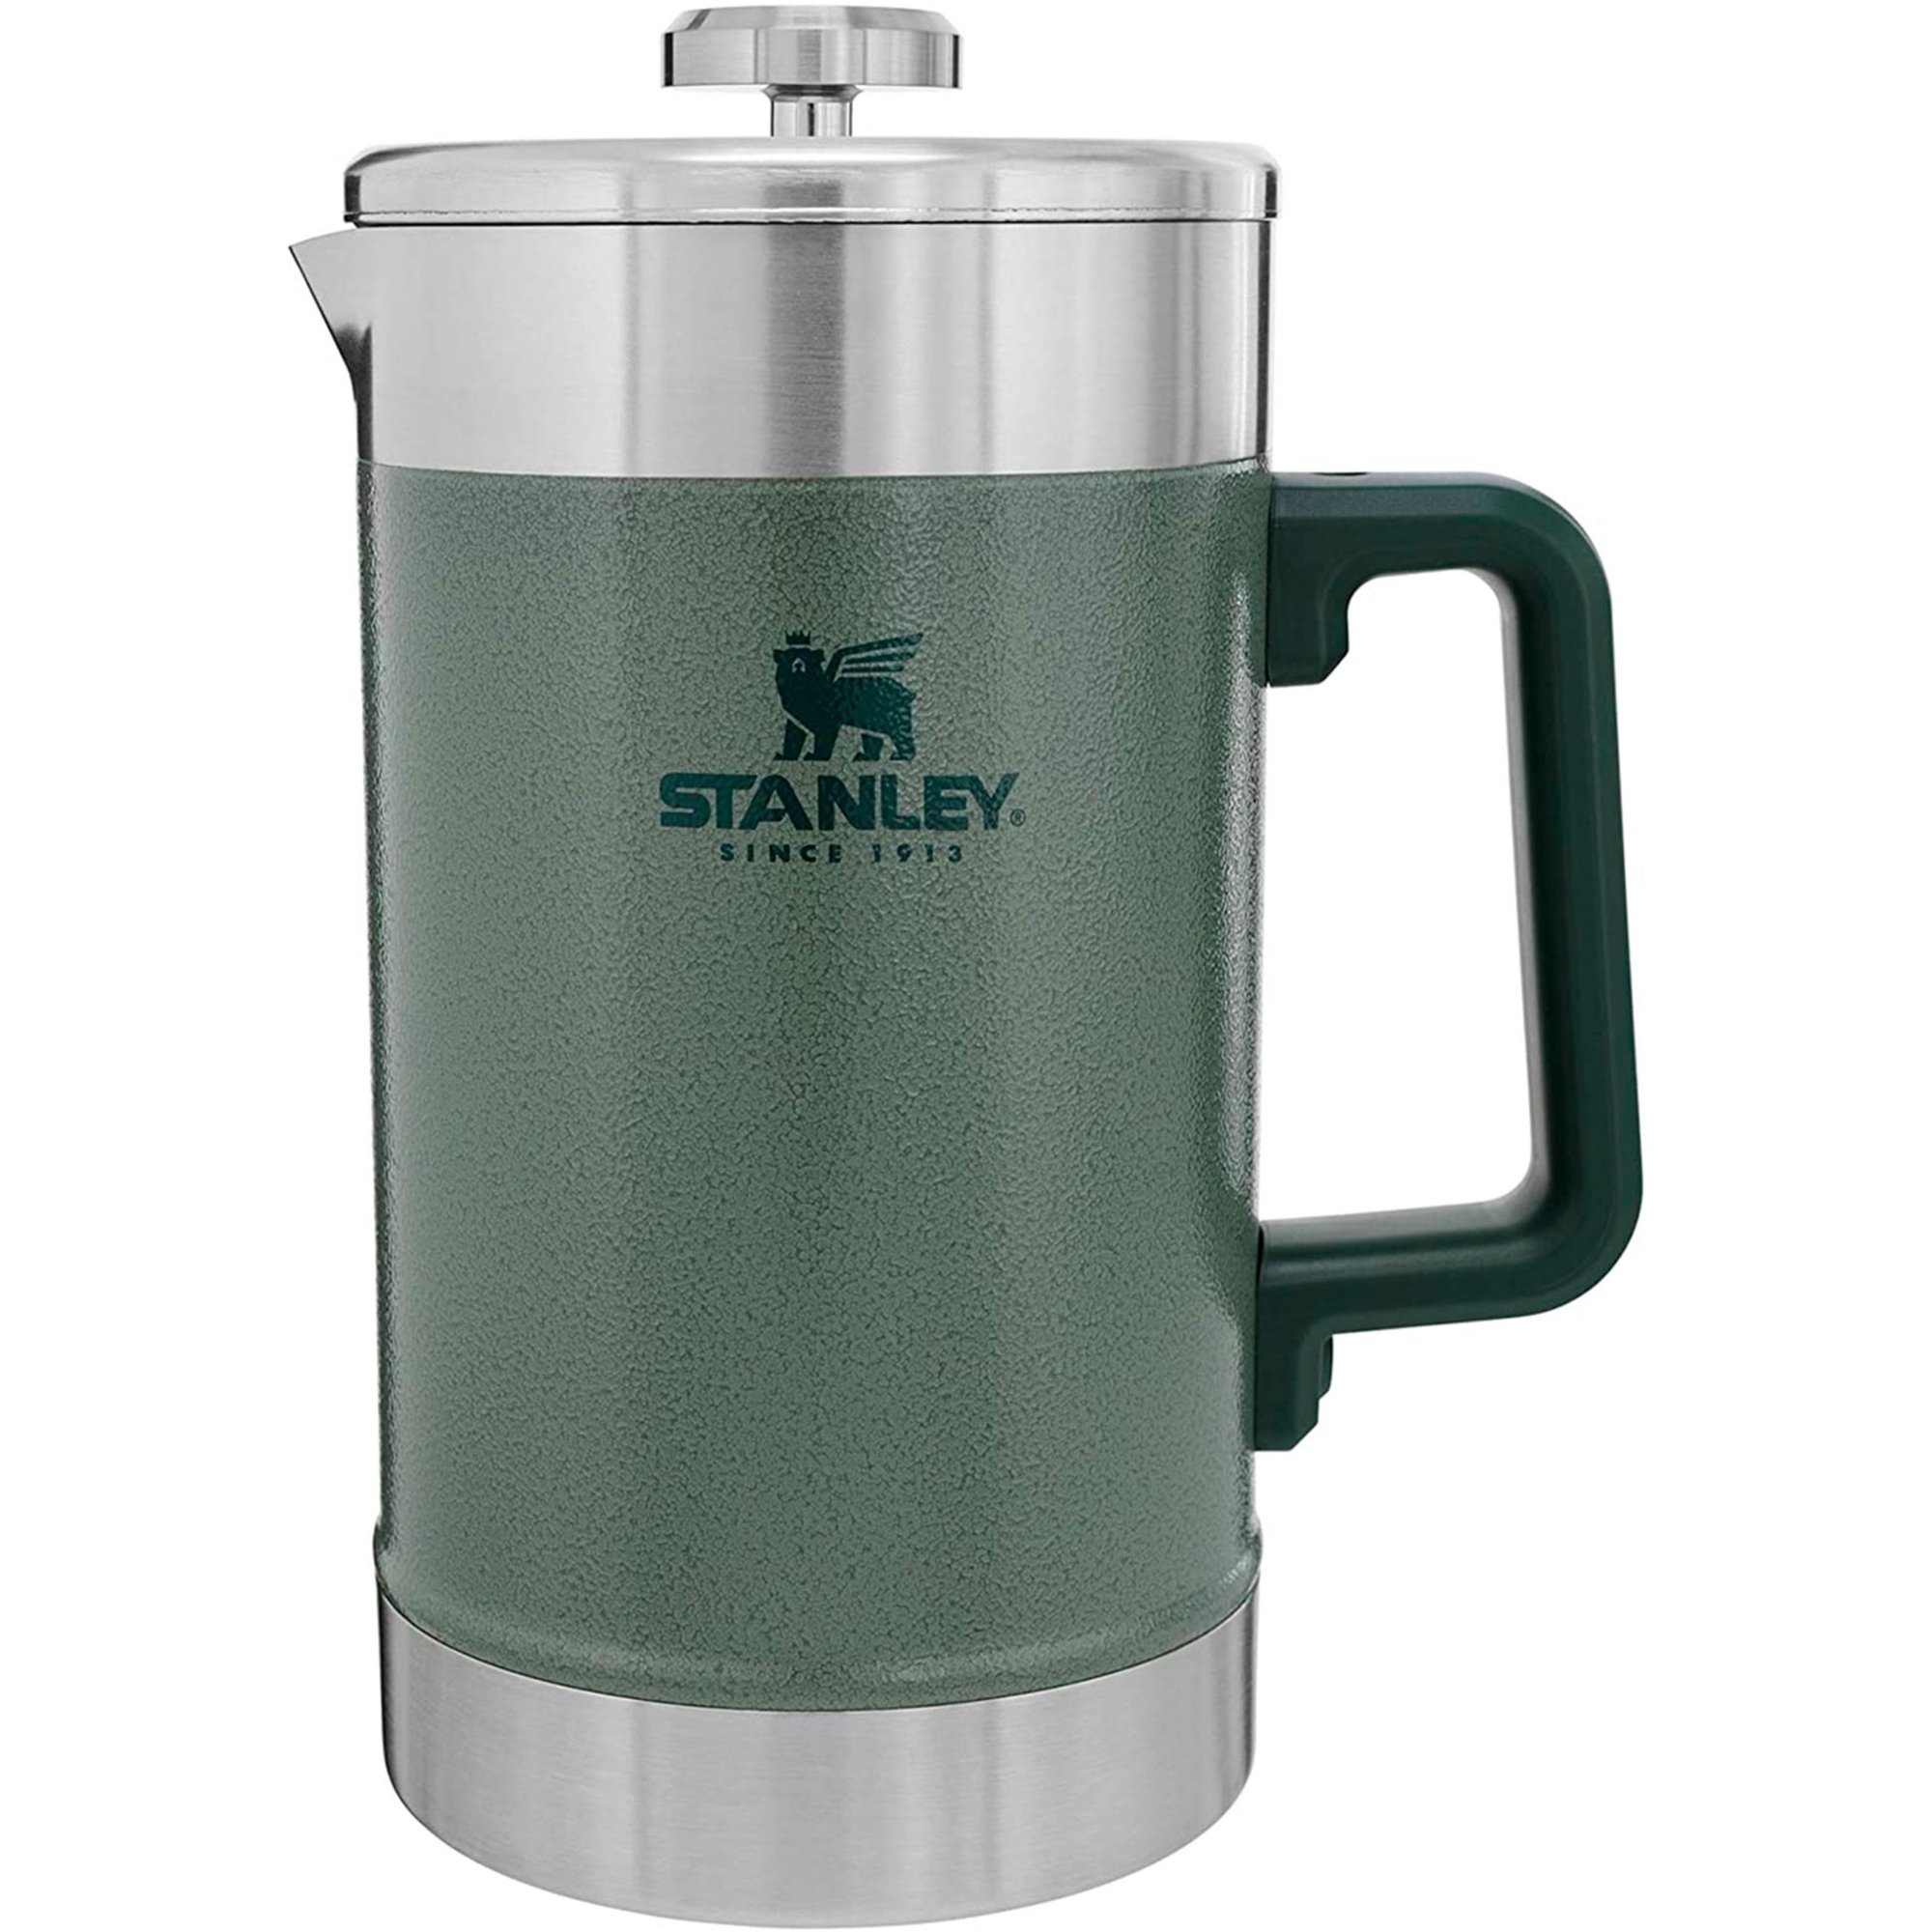 Stanley The Stay-Hot French Press 1,4 liter